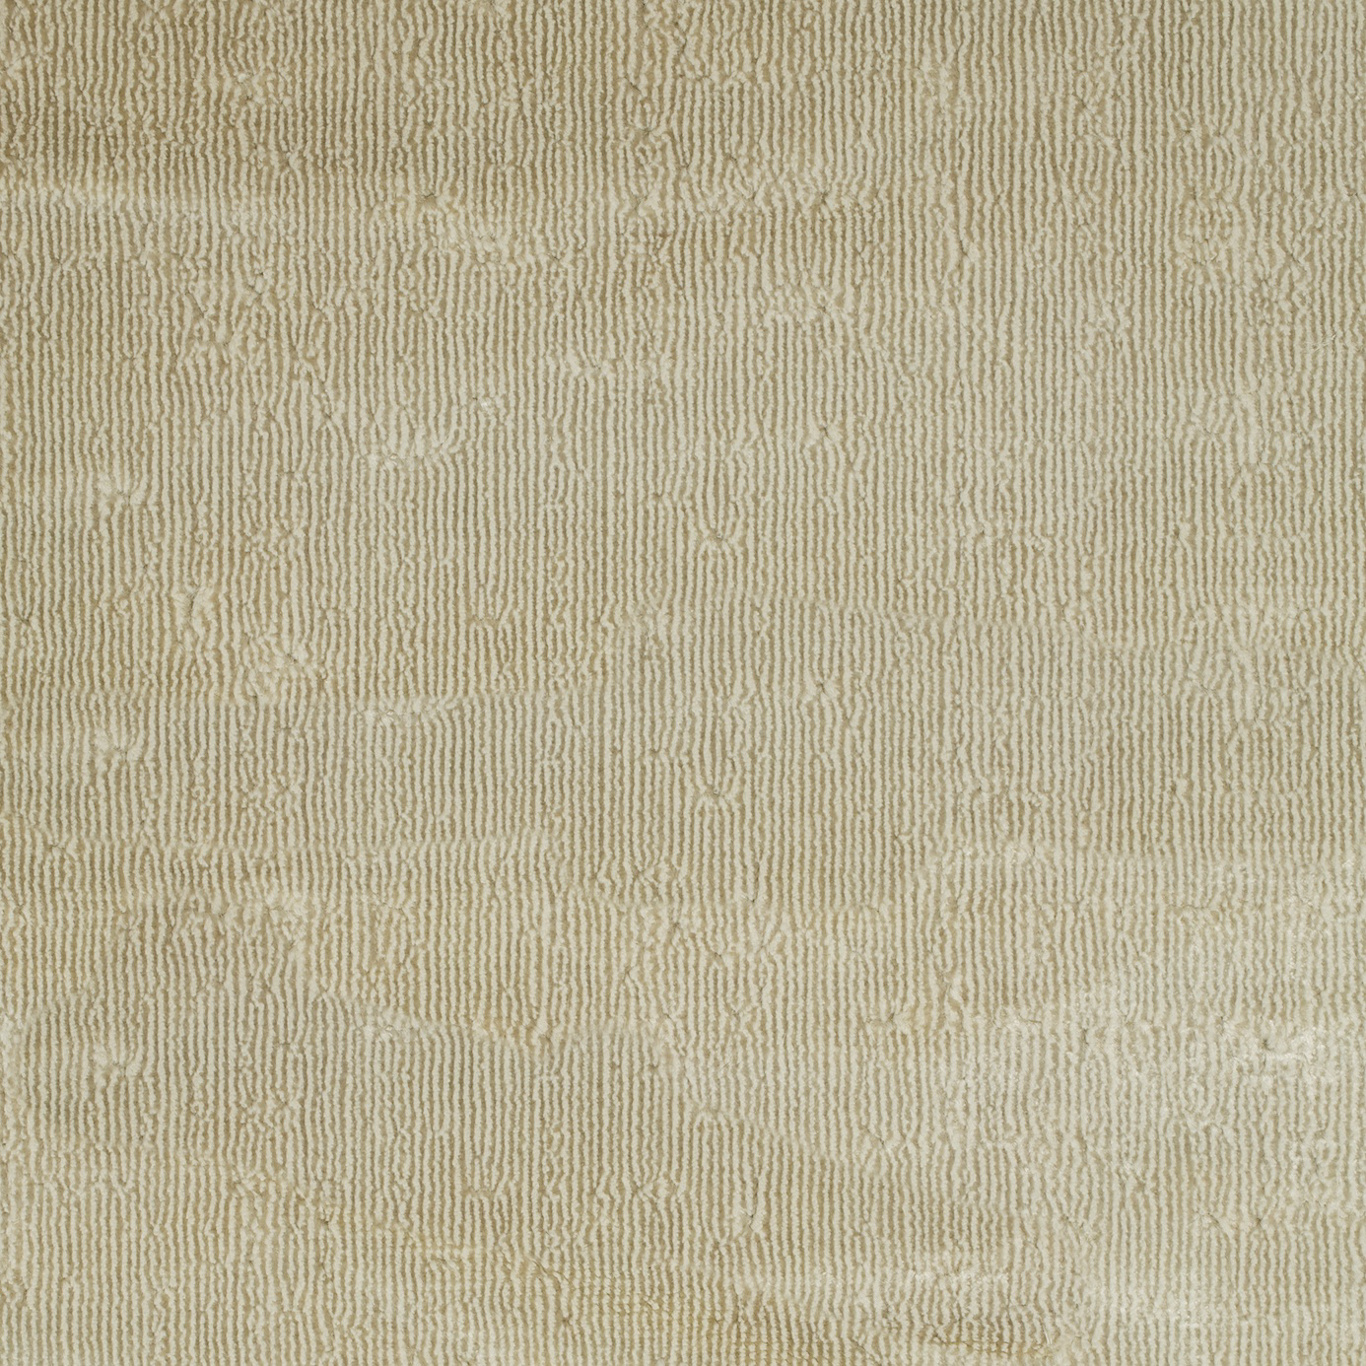 Curzon Pale Linen Fabric by ZOF